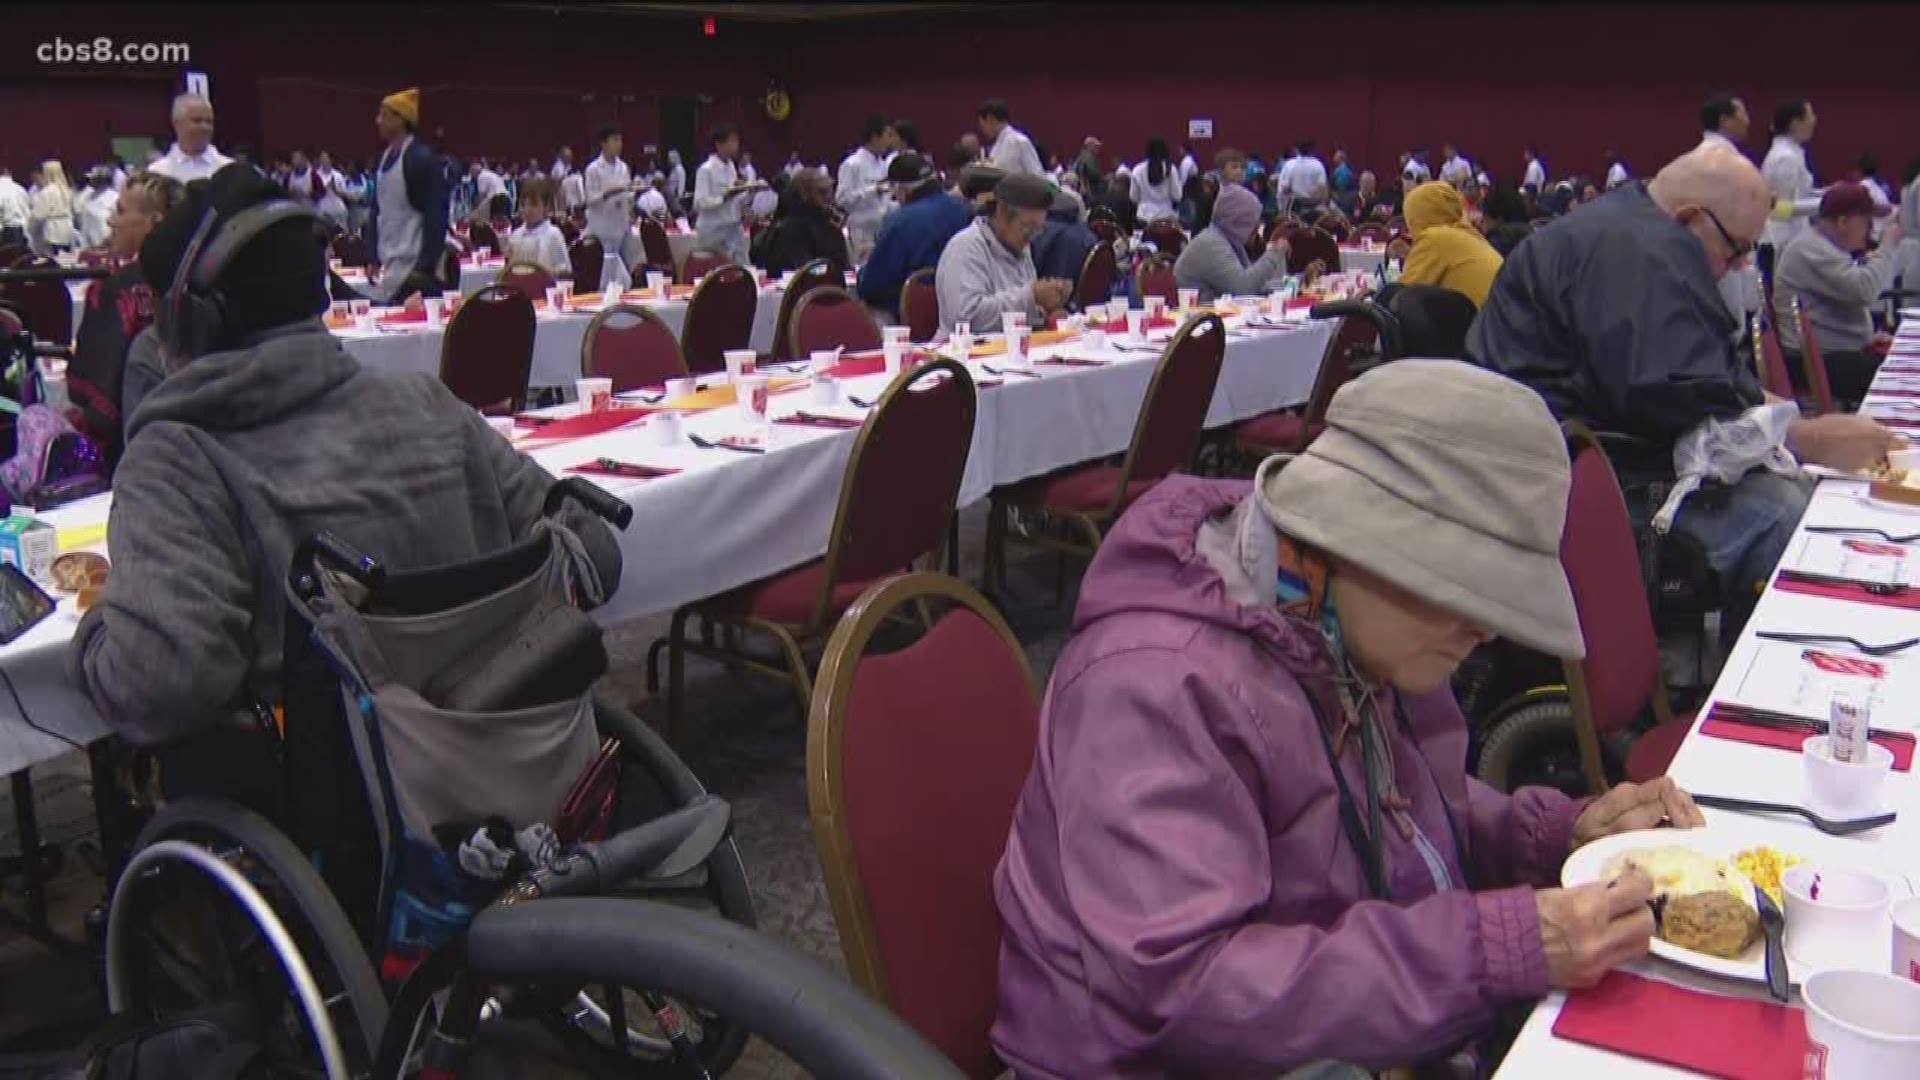 The USO and the Salvation Army on Thursday served hundreds of meals for families across San Diego County.